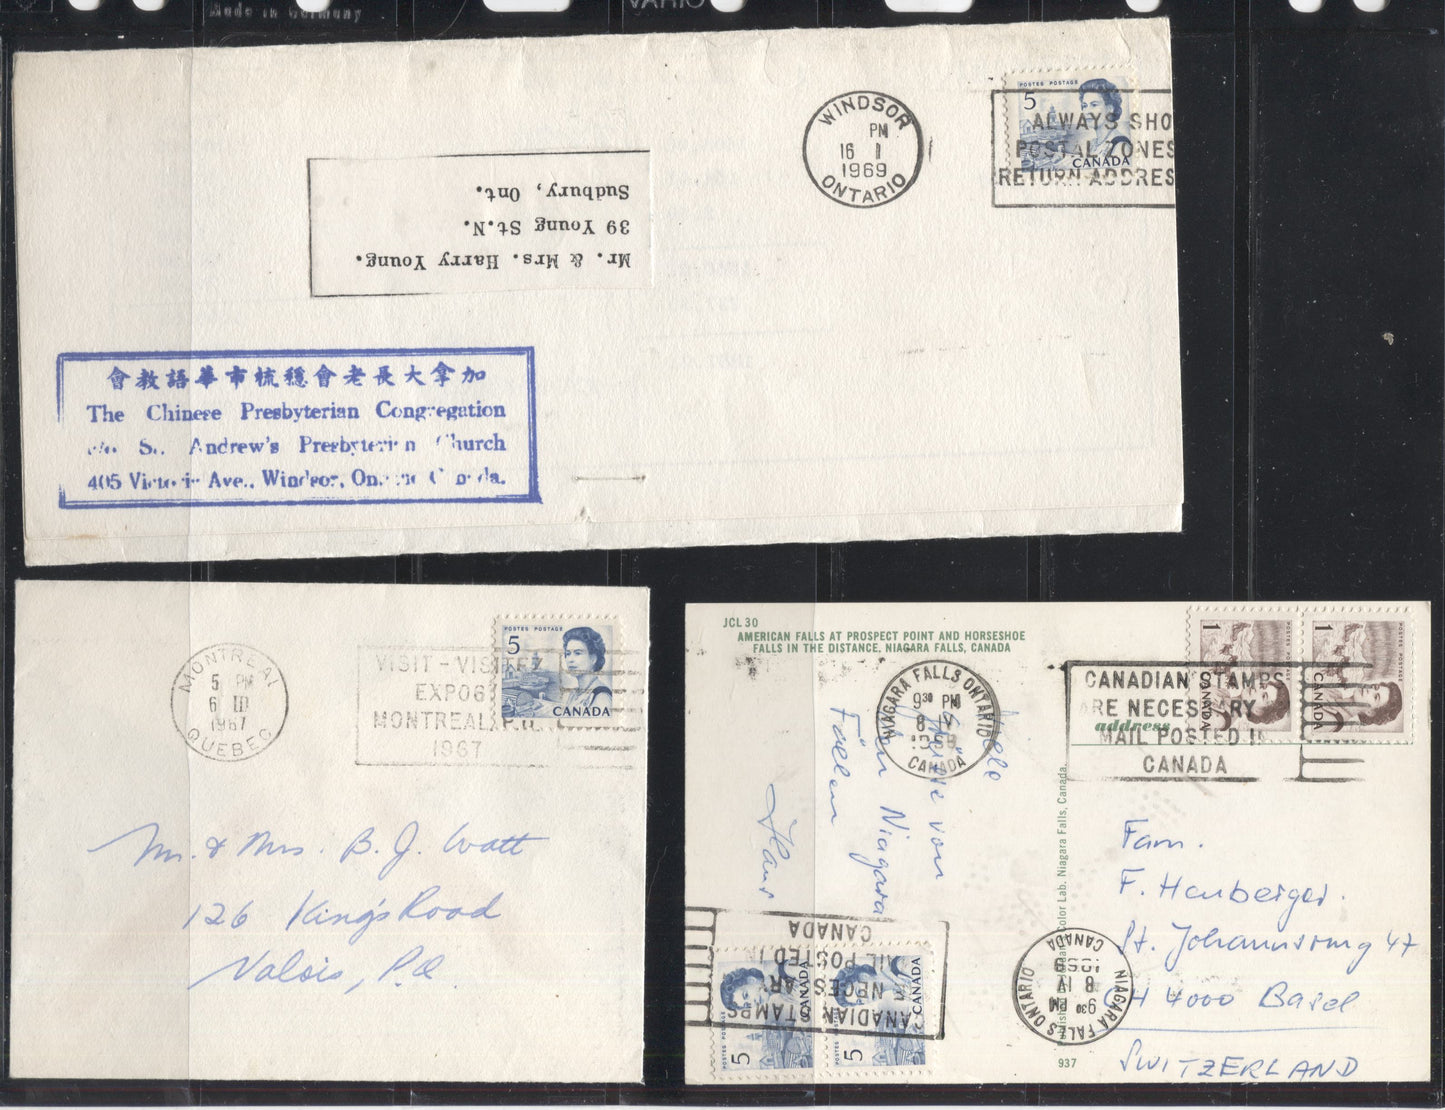 Lot 266 Canada #458, 458i, 458ii, 458iii 5c Deep Blue Atlantic Fishing Village, 1967-1973 Centennial Issue, Usages of DF, NF, LF-fl and HB Papers on 9 Covers and Postcards